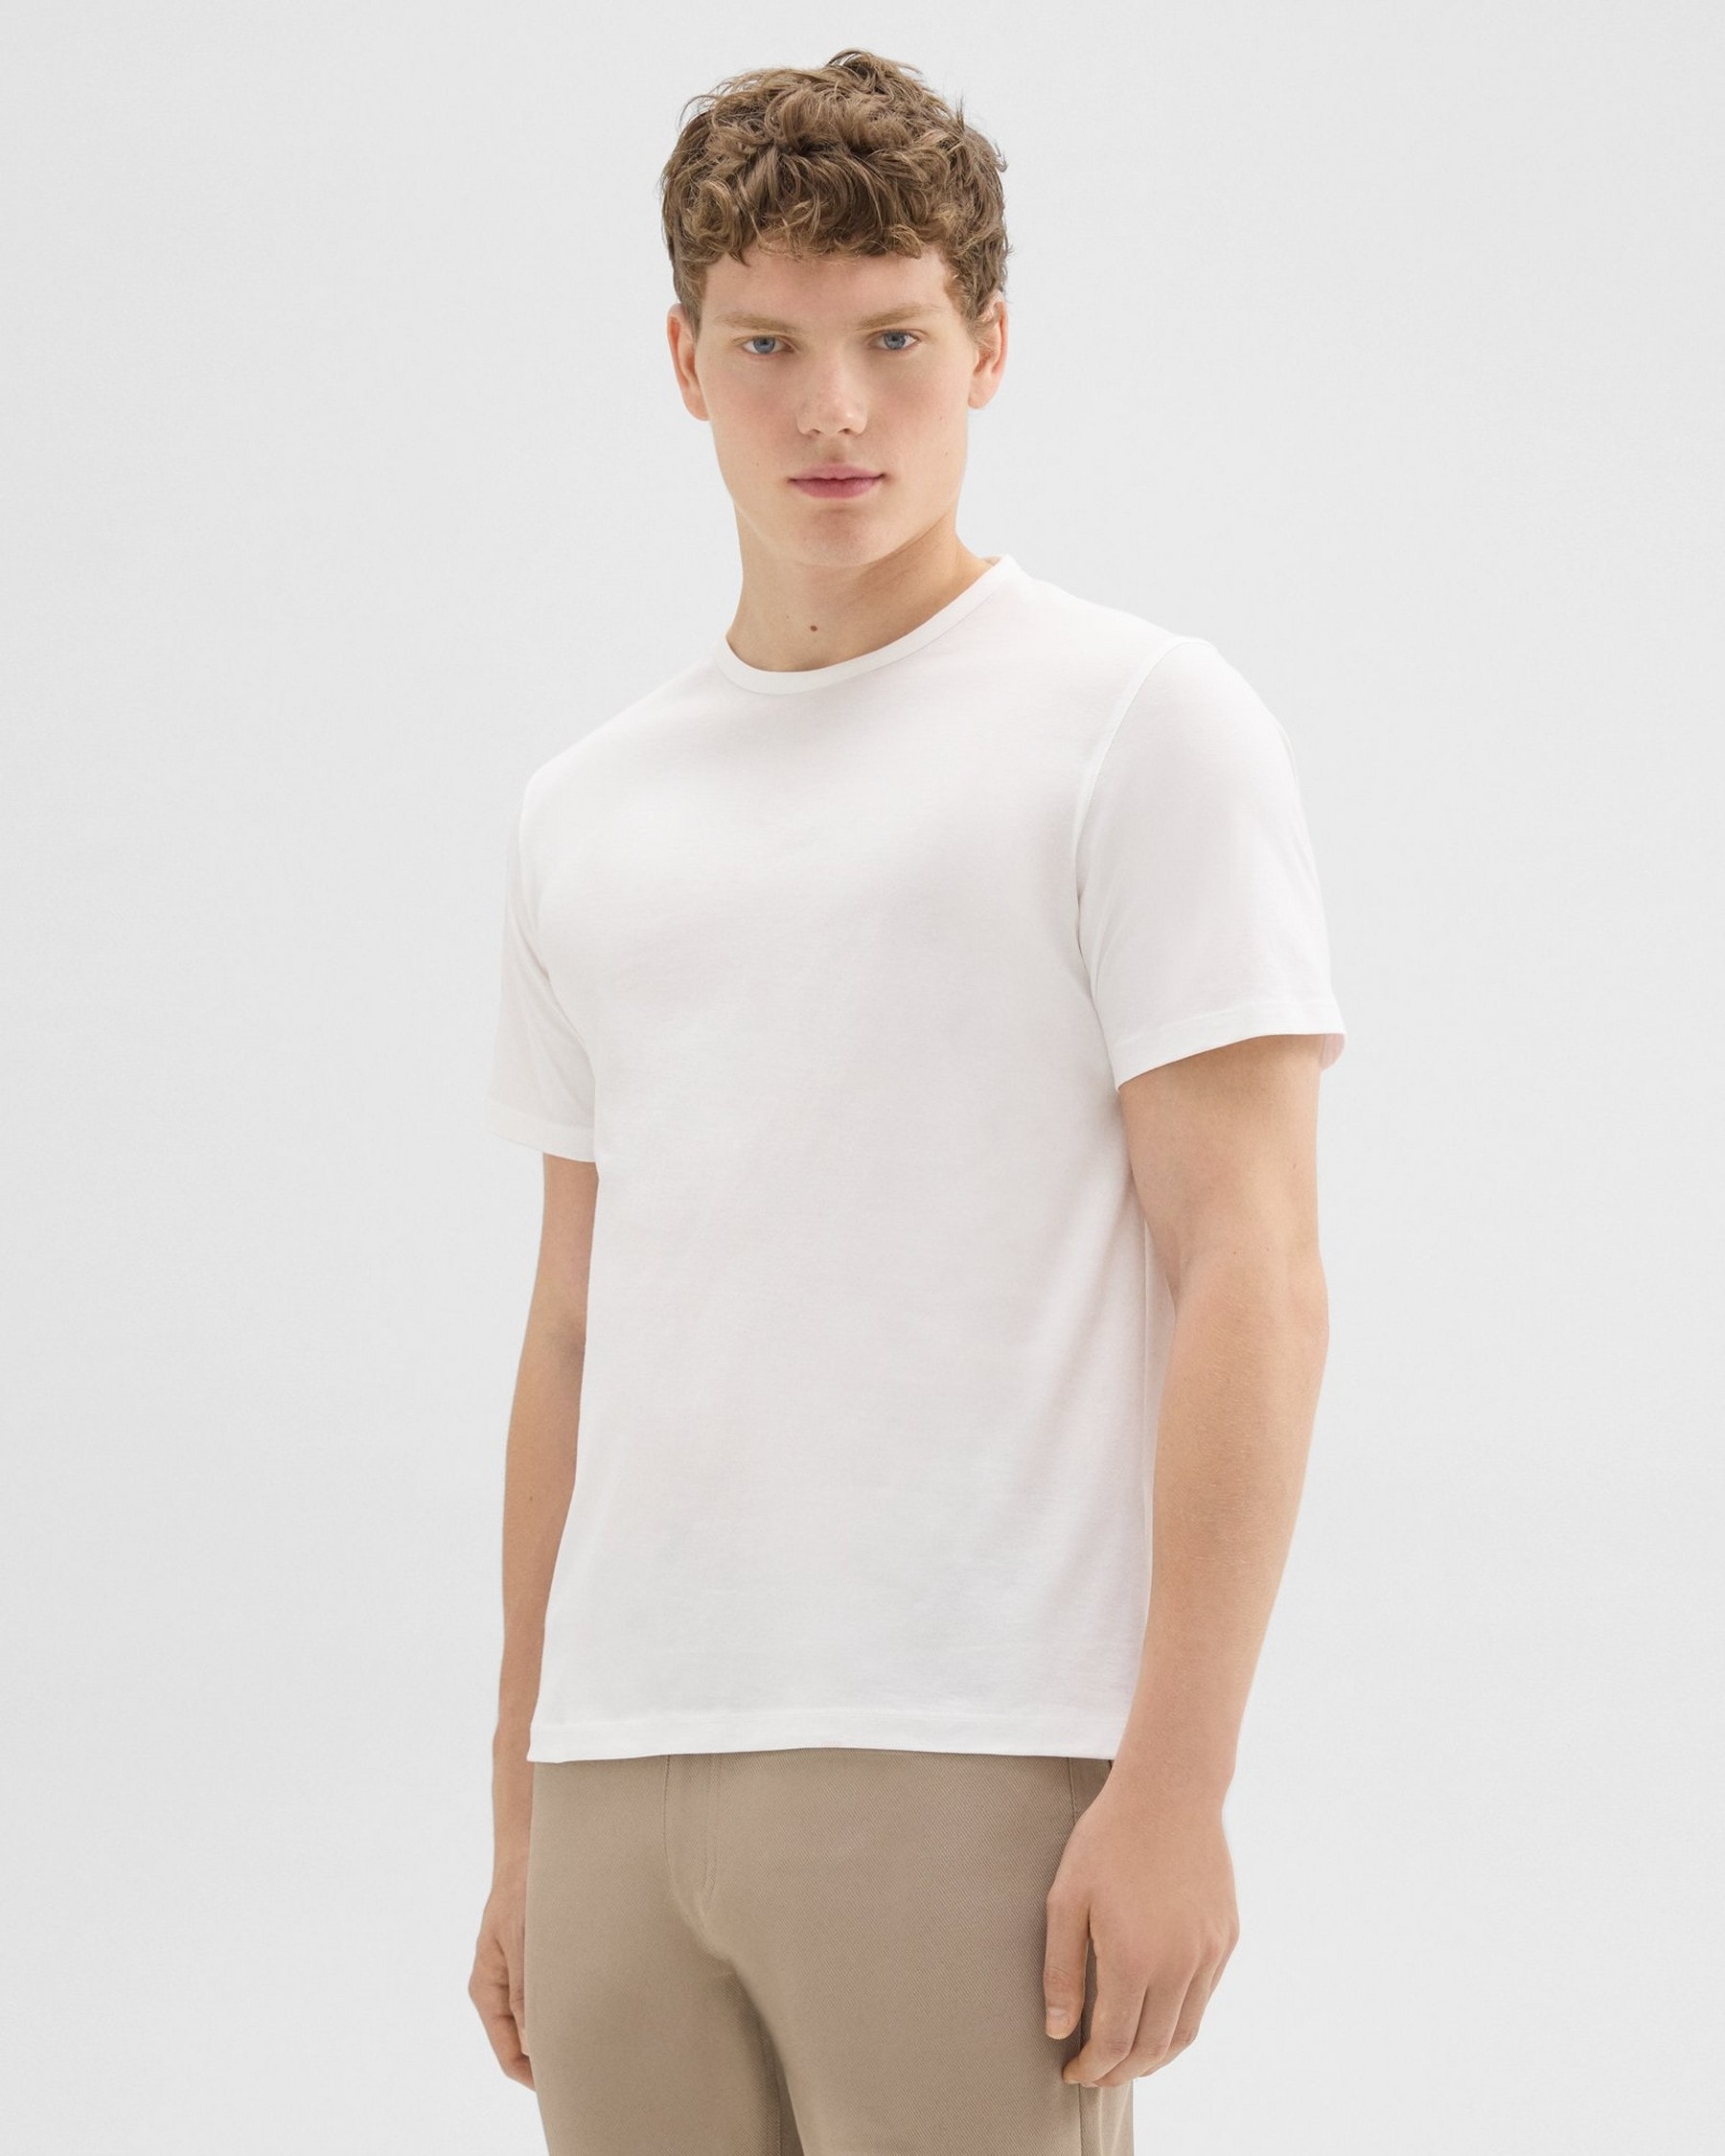 Precise Tee in Luxe Cotton Jersey